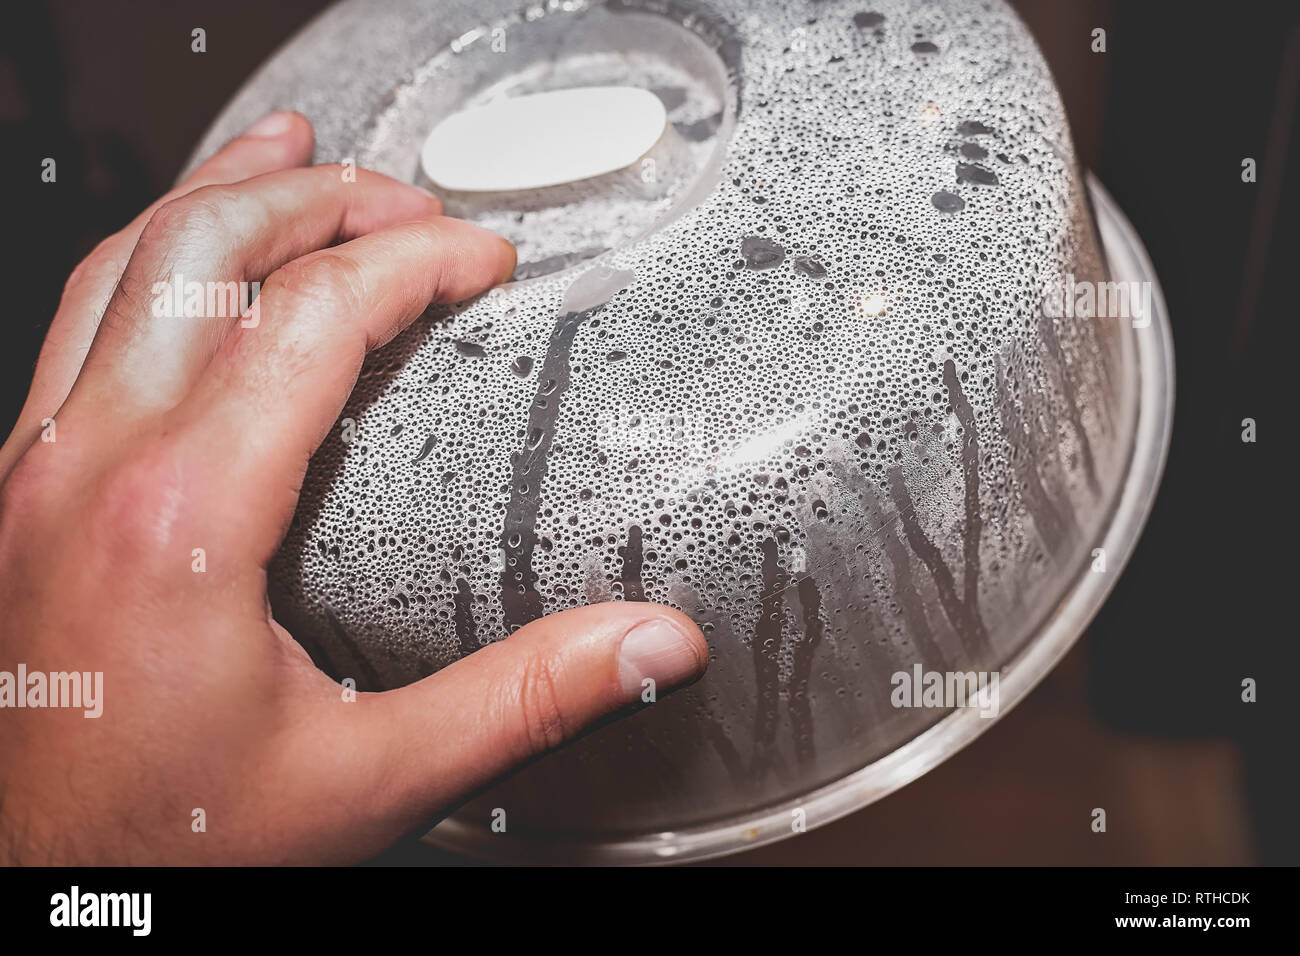 https://c8.alamy.com/comp/RTHCDK/hand-with-steamed-cover-for-microwave-closeup-condensation-and-water-droplets-on-the-surface-of-the-plastic-after-heating-food-RTHCDK.jpg